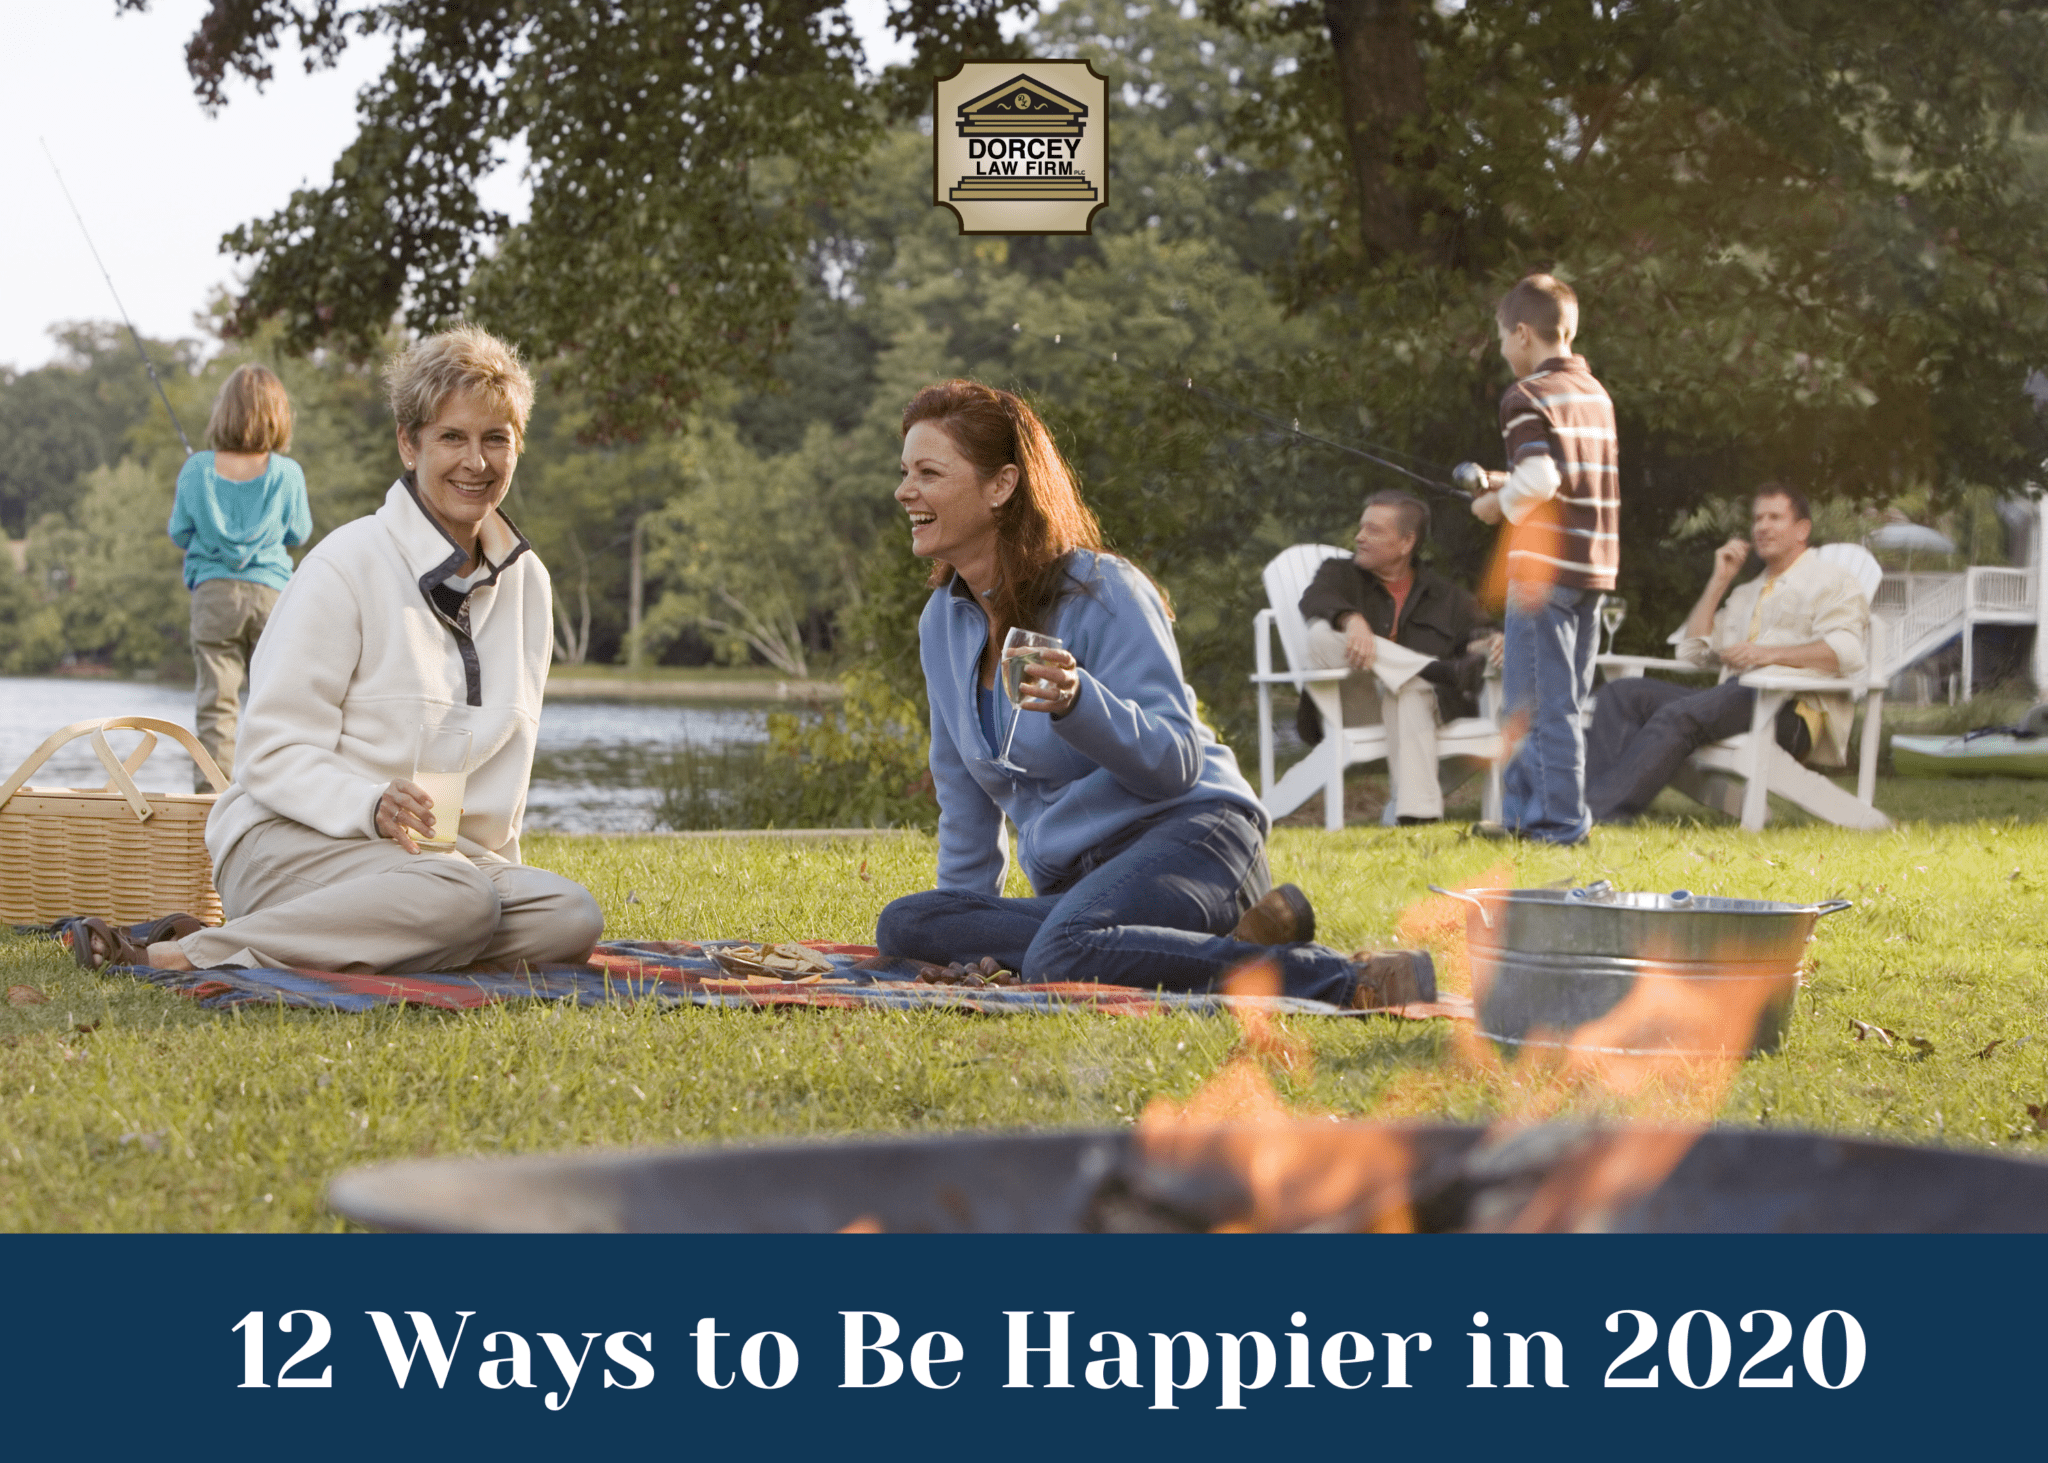 12 Ways to Be Happier in 2020